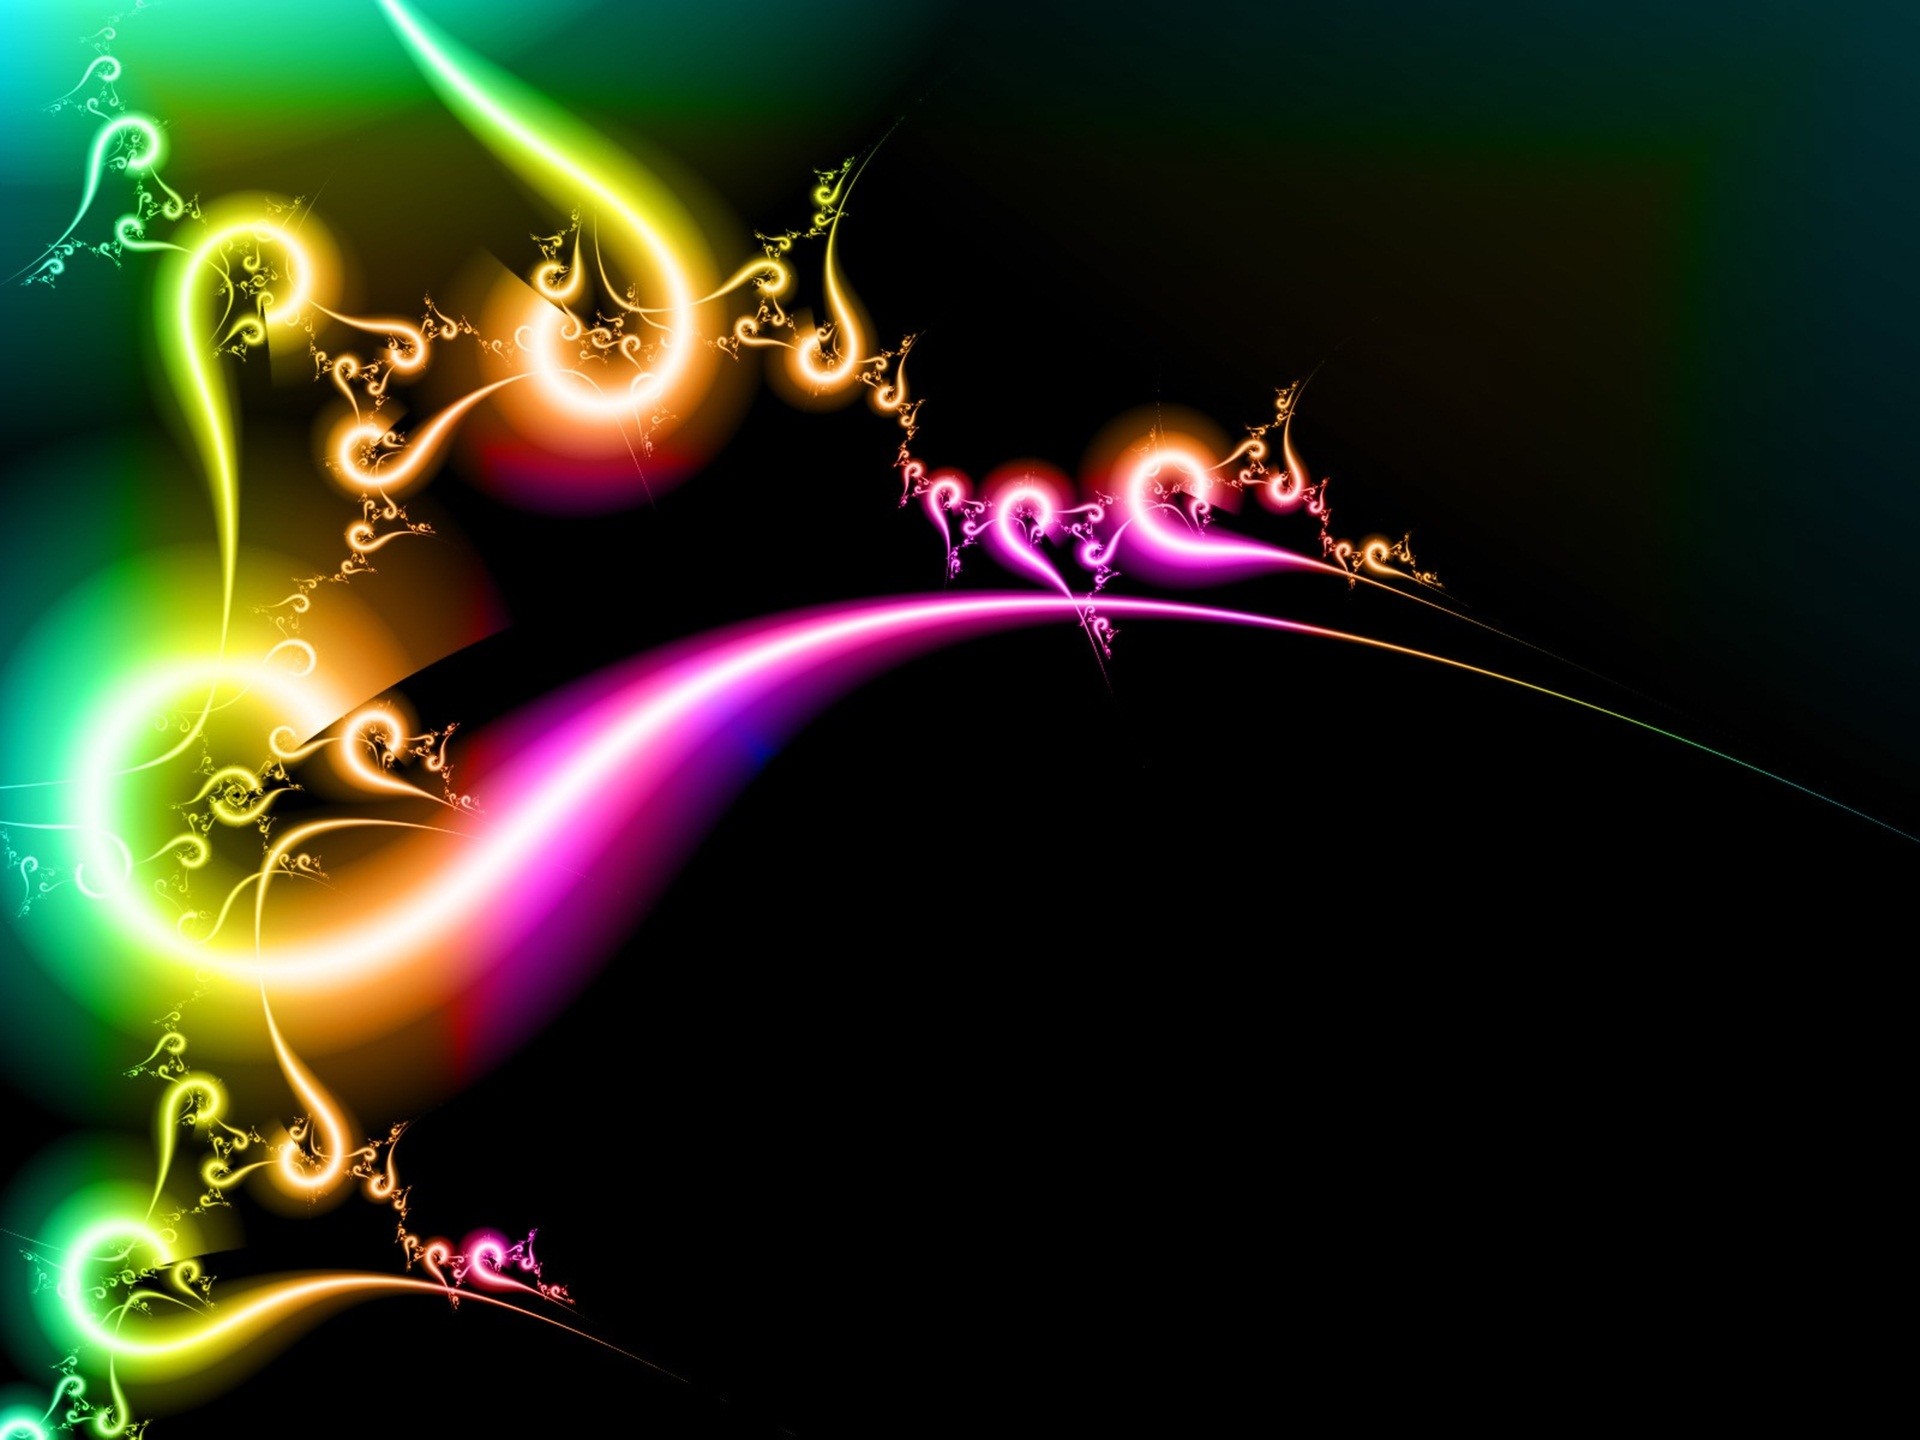 1920x1440 Abstract Wallpaper: Awesome Rainbow Android Wallpapers For HD .